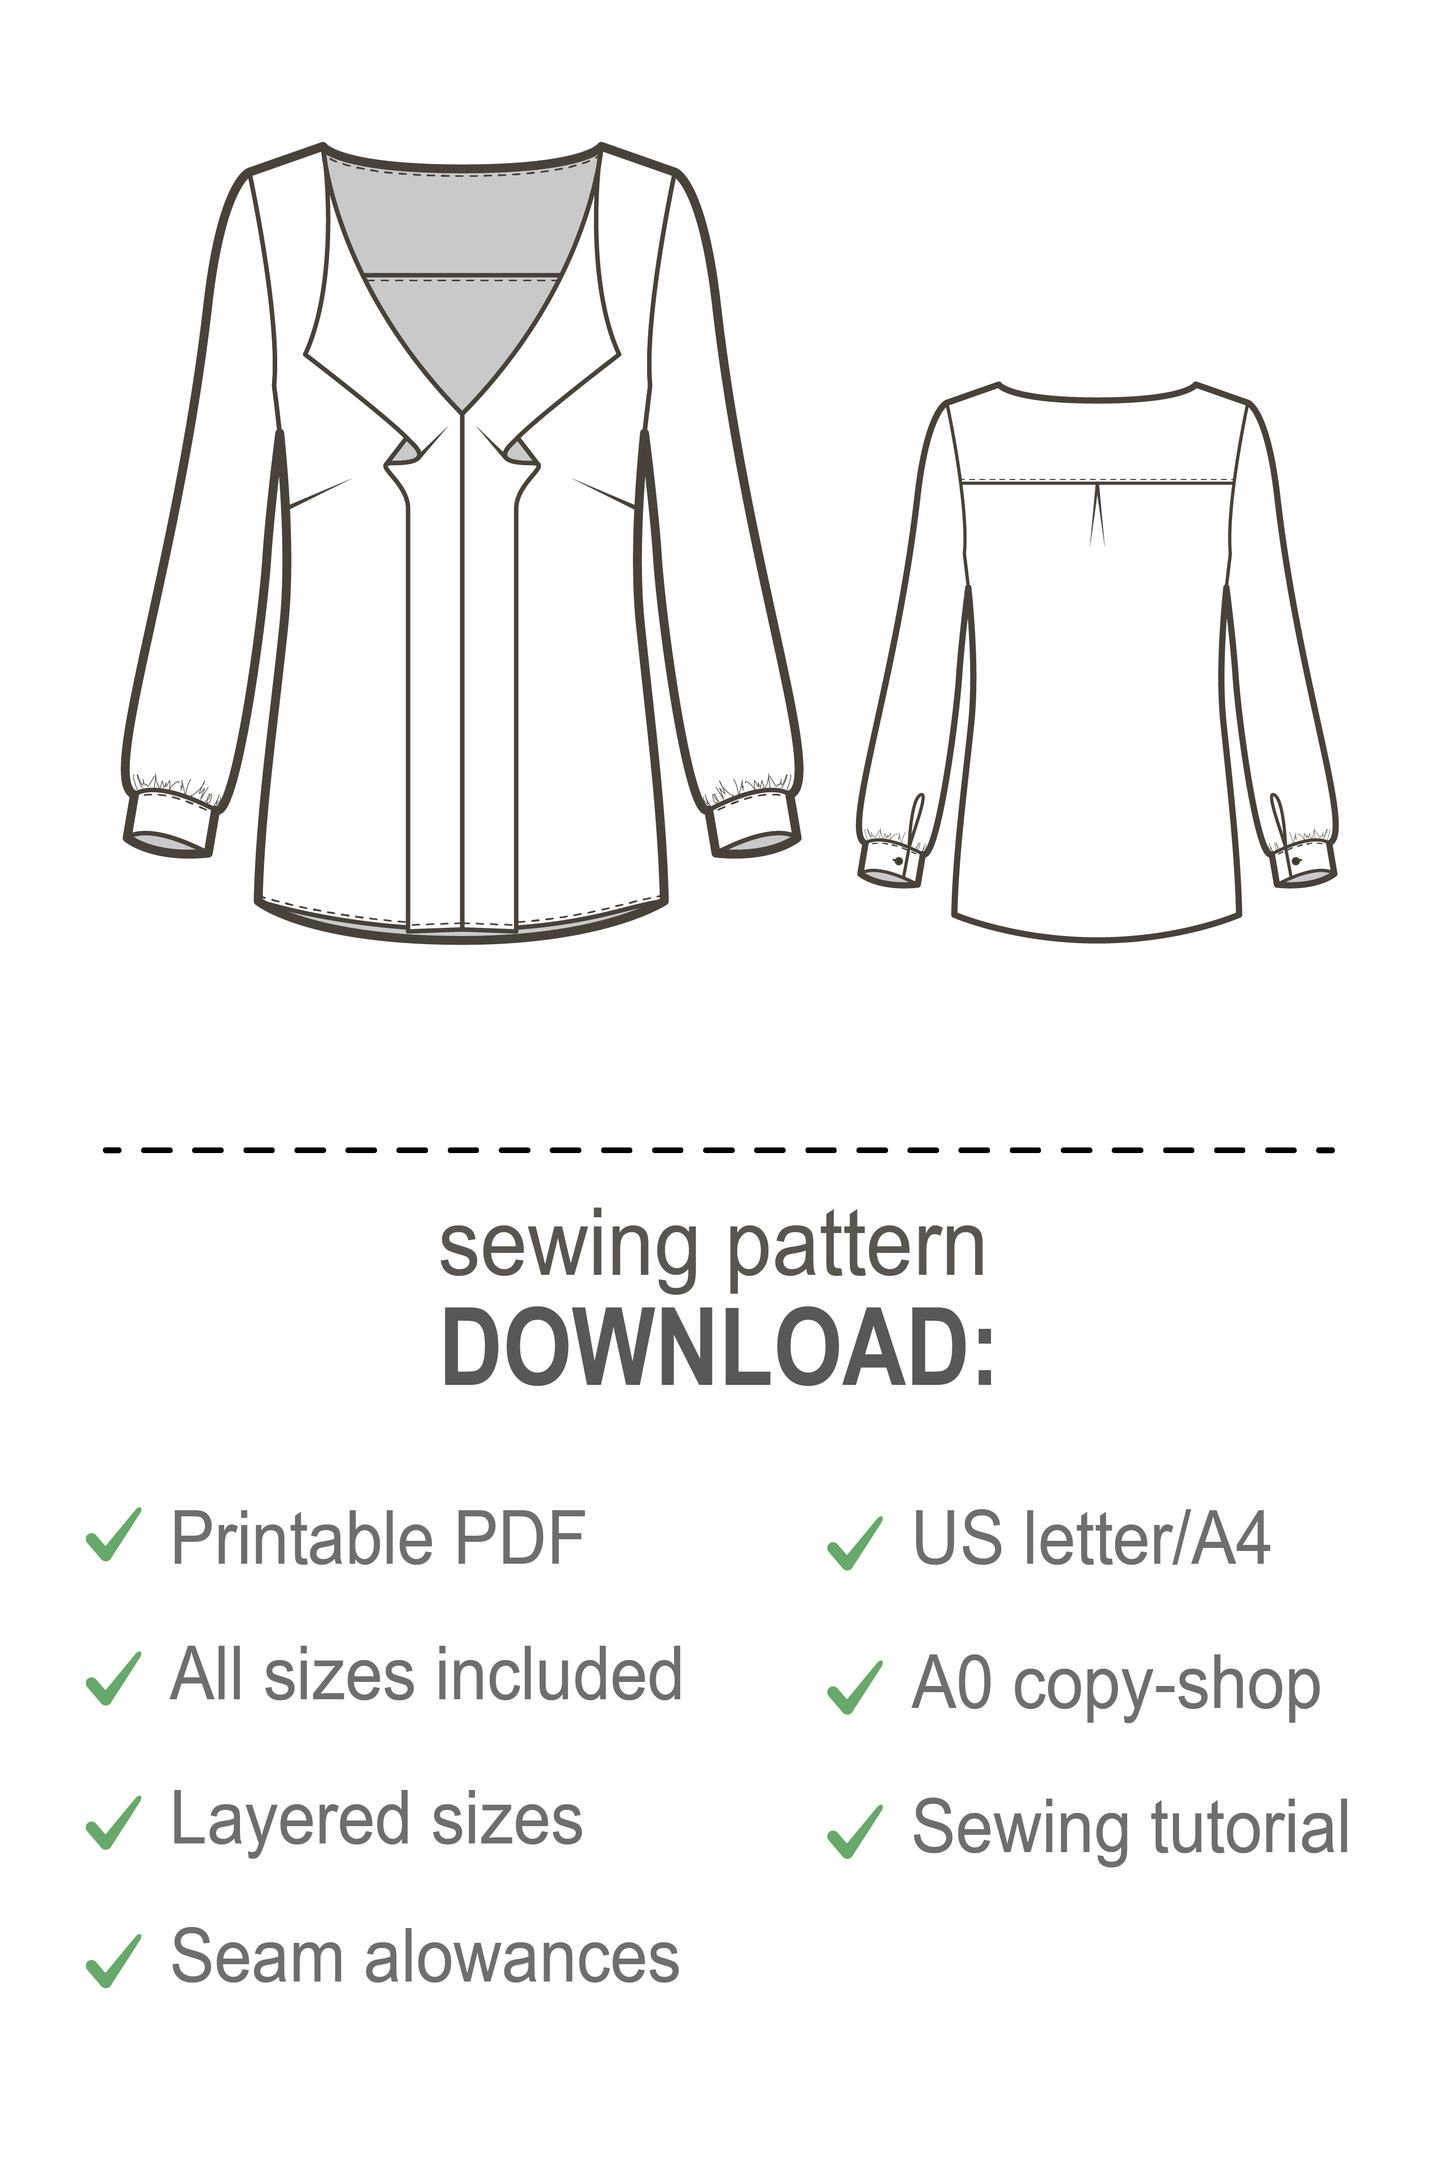 Top Patterns - Blouse Patterns - Blouse Sewing Patterns - Womens Sewing Patterns - Top Patterns - Simple Blouse Patterns - Sewing Tutorials